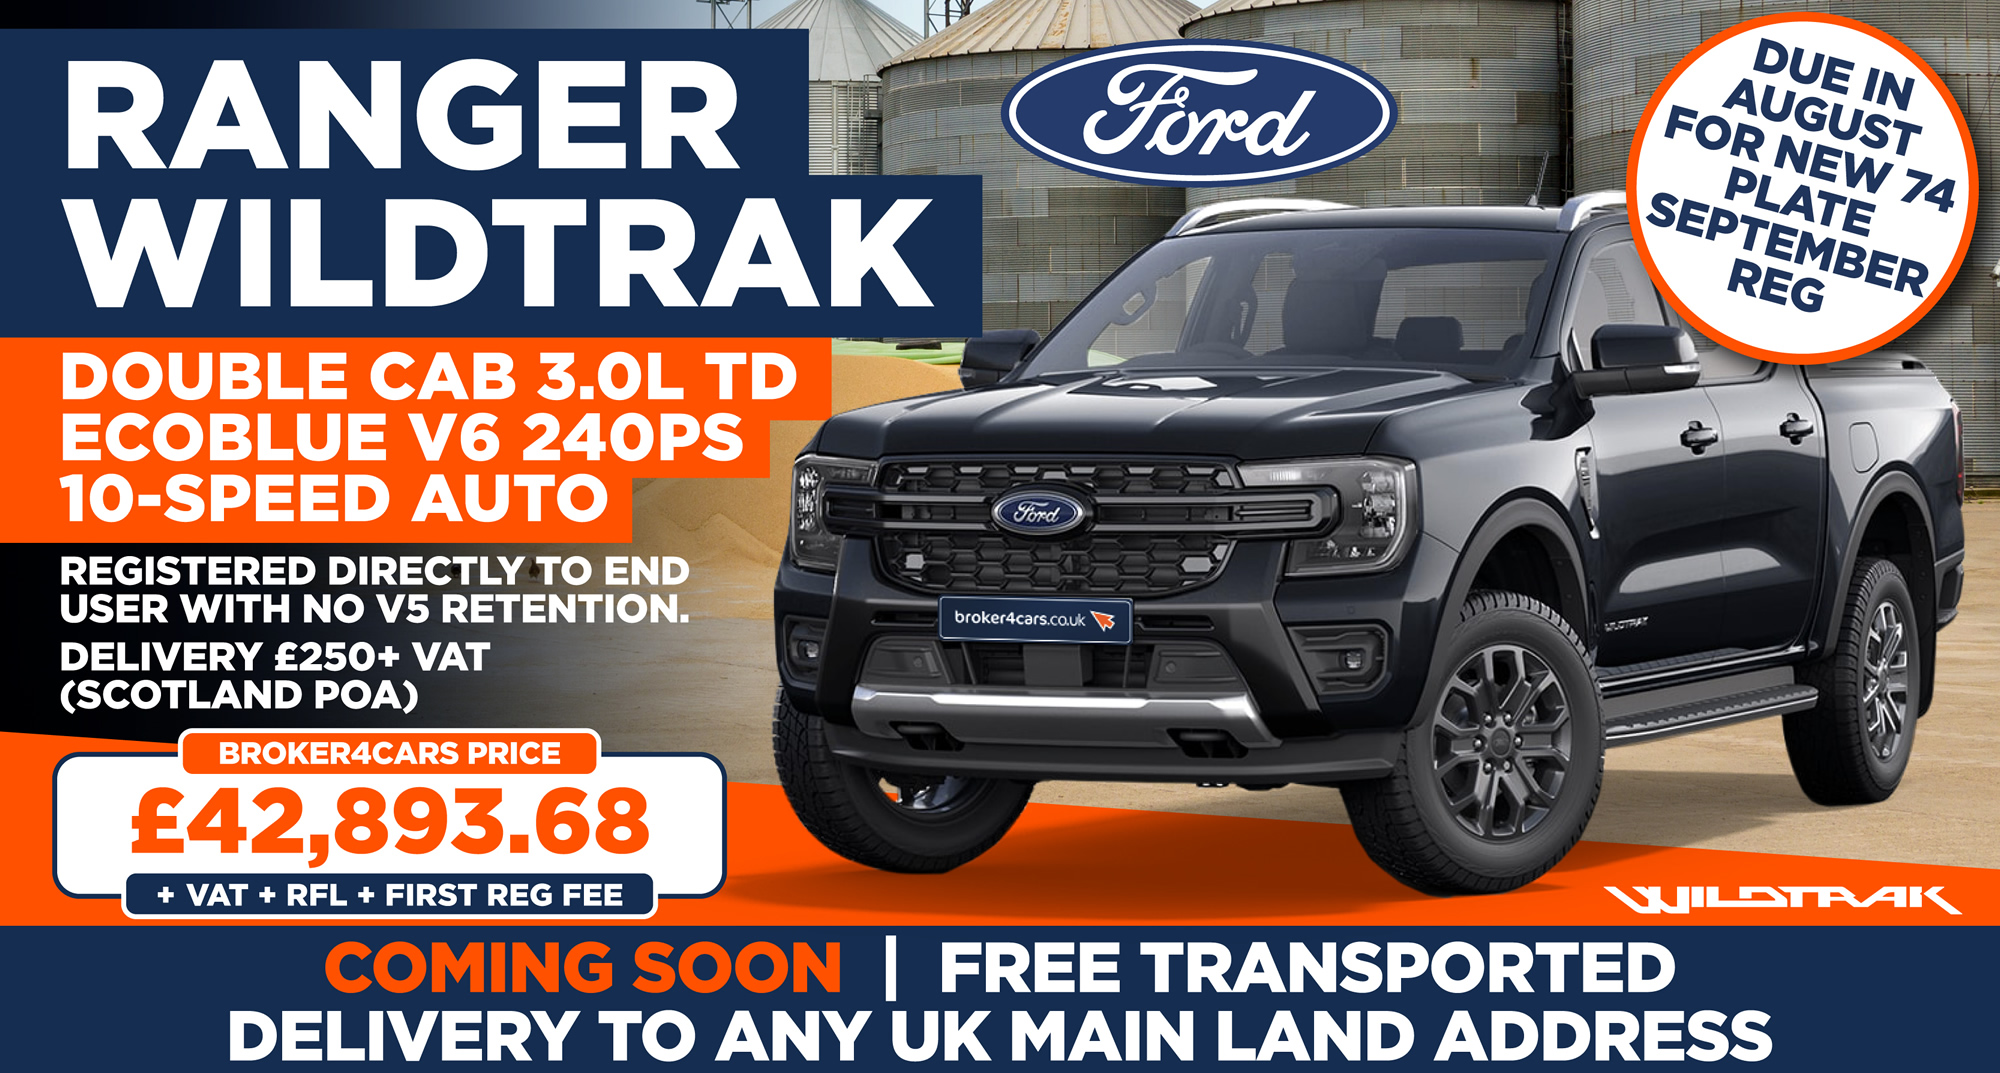 Ranger Wildtrak 3.0L TD Ecoblue V6 240PS10-Speed Automatic, Available in Agate Black and Carbonised Grey